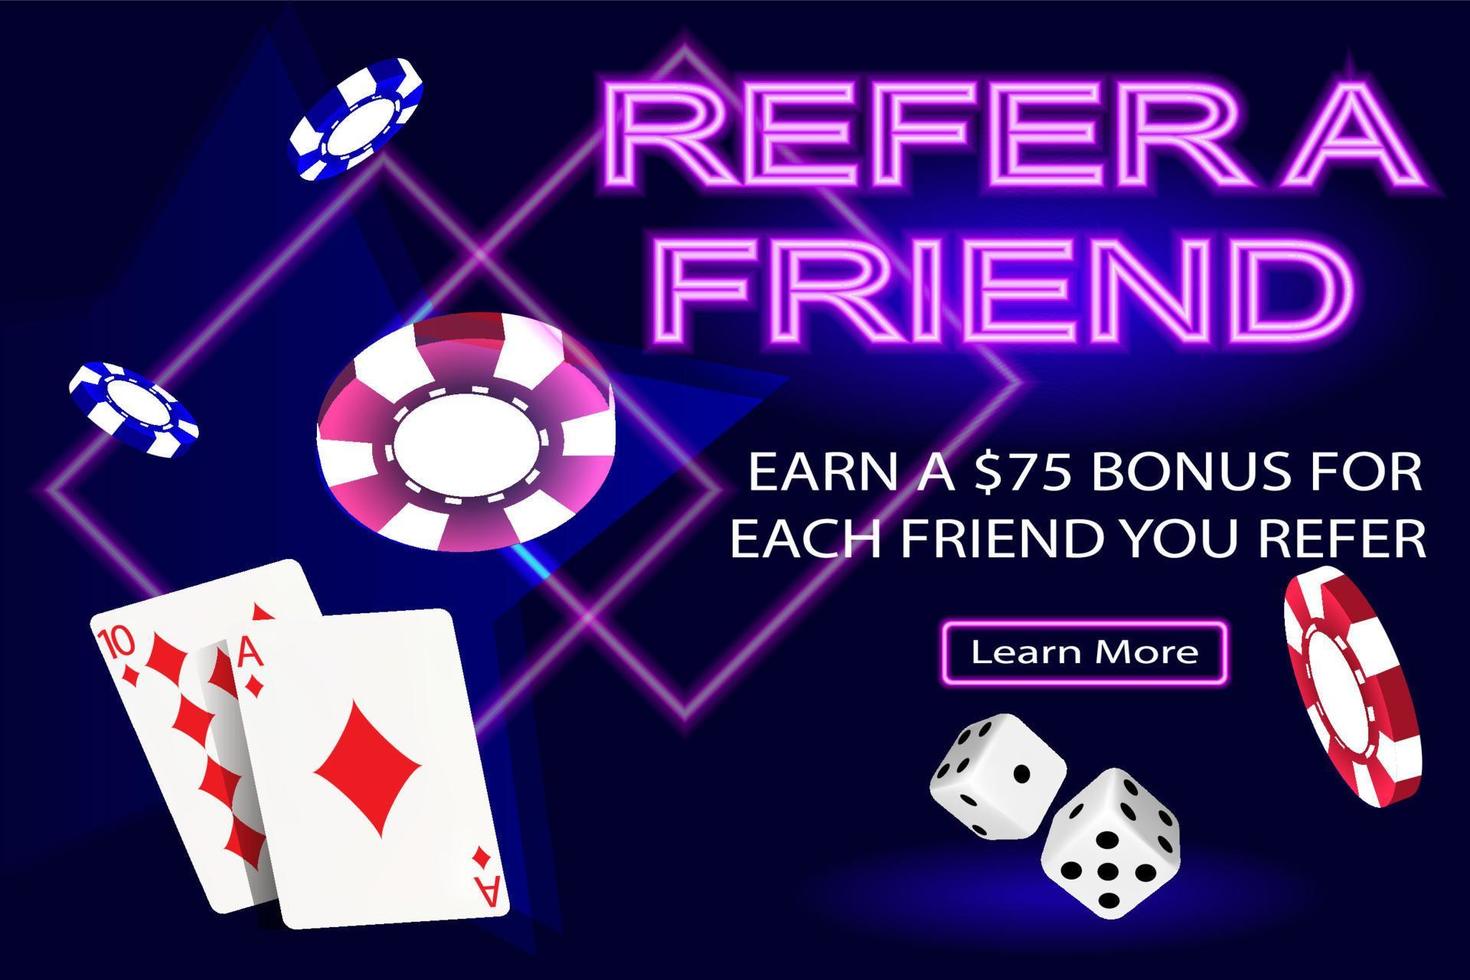 Online casino. Banner with refer a friend promotion, dice, cards and chips on a dark blue background. The concept of gambling, online casino. Vector image